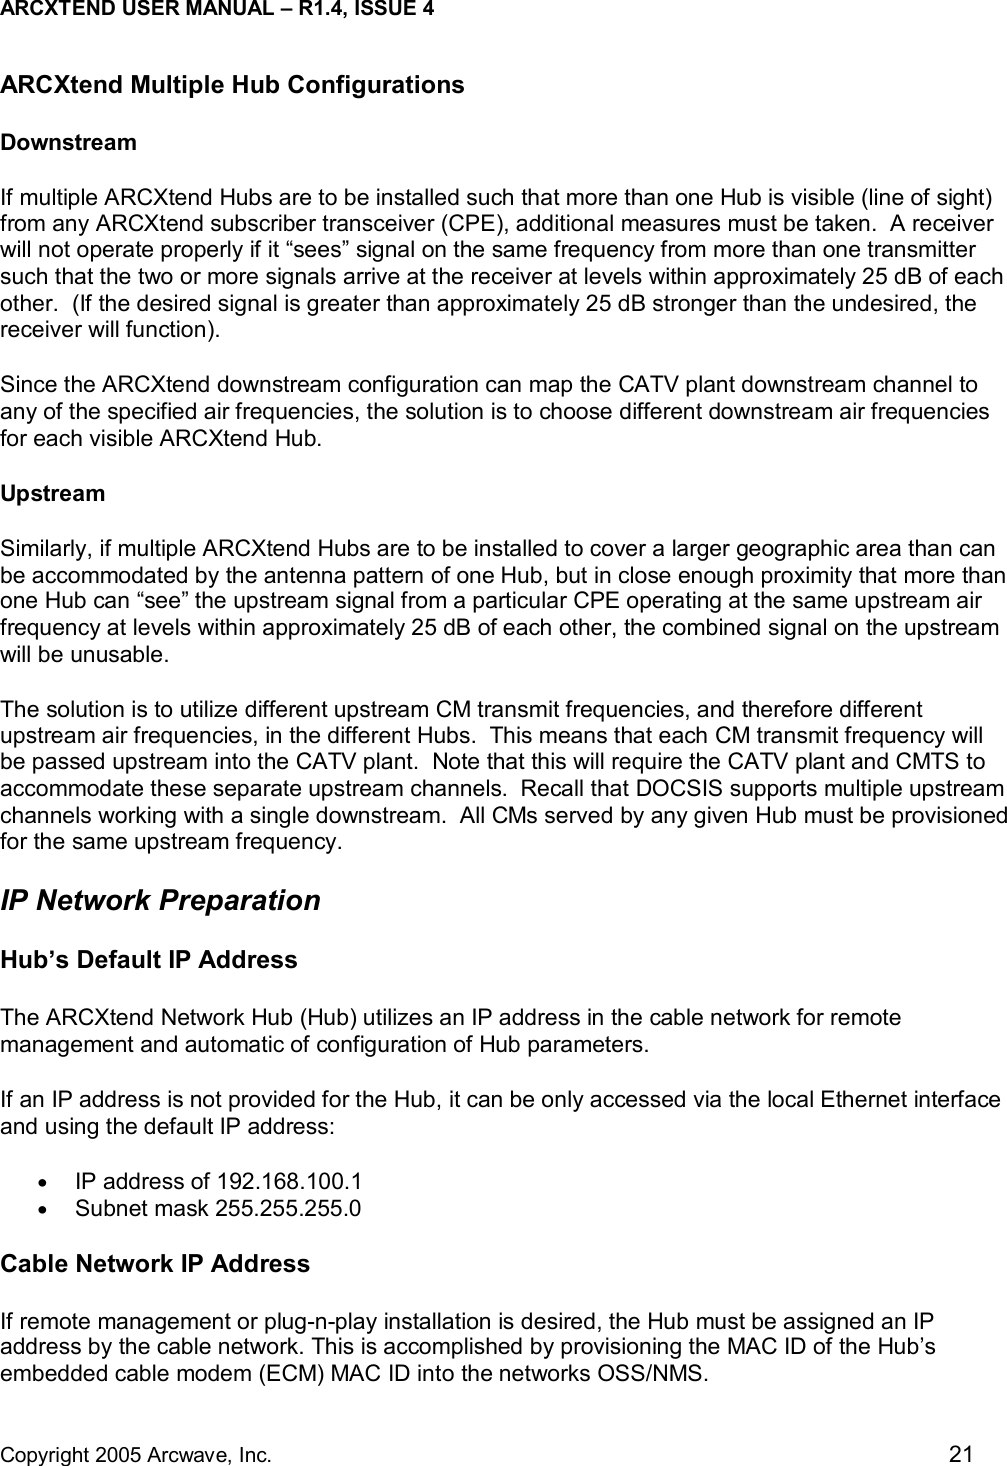 ARCXTEND USER MANUAL – R1.4, ISSUE 4  Copyright 2005 Arcwave, Inc.    21 ARCXtend Multiple Hub Configurations Downstream If multiple ARCXtend Hubs are to be installed such that more than one Hub is visible (line of sight) from any ARCXtend subscriber transceiver (CPE), additional measures must be taken.  A receiver will not operate properly if it “sees” signal on the same frequency from more than one transmitter such that the two or more signals arrive at the receiver at levels within approximately 25 dB of each other.  (If the desired signal is greater than approximately 25 dB stronger than the undesired, the receiver will function). Since the ARCXtend downstream configuration can map the CATV plant downstream channel to any of the specified air frequencies, the solution is to choose different downstream air frequencies for each visible ARCXtend Hub.  Upstream Similarly, if multiple ARCXtend Hubs are to be installed to cover a larger geographic area than can be accommodated by the antenna pattern of one Hub, but in close enough proximity that more than one Hub can “see” the upstream signal from a particular CPE operating at the same upstream air frequency at levels within approximately 25 dB of each other, the combined signal on the upstream will be unusable. The solution is to utilize different upstream CM transmit frequencies, and therefore different upstream air frequencies, in the different Hubs.  This means that each CM transmit frequency will be passed upstream into the CATV plant.  Note that this will require the CATV plant and CMTS to accommodate these separate upstream channels.  Recall that DOCSIS supports multiple upstream channels working with a single downstream.  All CMs served by any given Hub must be provisioned for the same upstream frequency. IP Network Preparation Hub’s Default IP Address The ARCXtend Network Hub (Hub) utilizes an IP address in the cable network for remote management and automatic of configuration of Hub parameters.  If an IP address is not provided for the Hub, it can be only accessed via the local Ethernet interface and using the default IP address: •  IP address of 192.168.100.1  •  Subnet mask 255.255.255.0 Cable Network IP Address If remote management or plug-n-play installation is desired, the Hub must be assigned an IP address by the cable network. This is accomplished by provisioning the MAC ID of the Hub’s embedded cable modem (ECM) MAC ID into the networks OSS/NMS.  